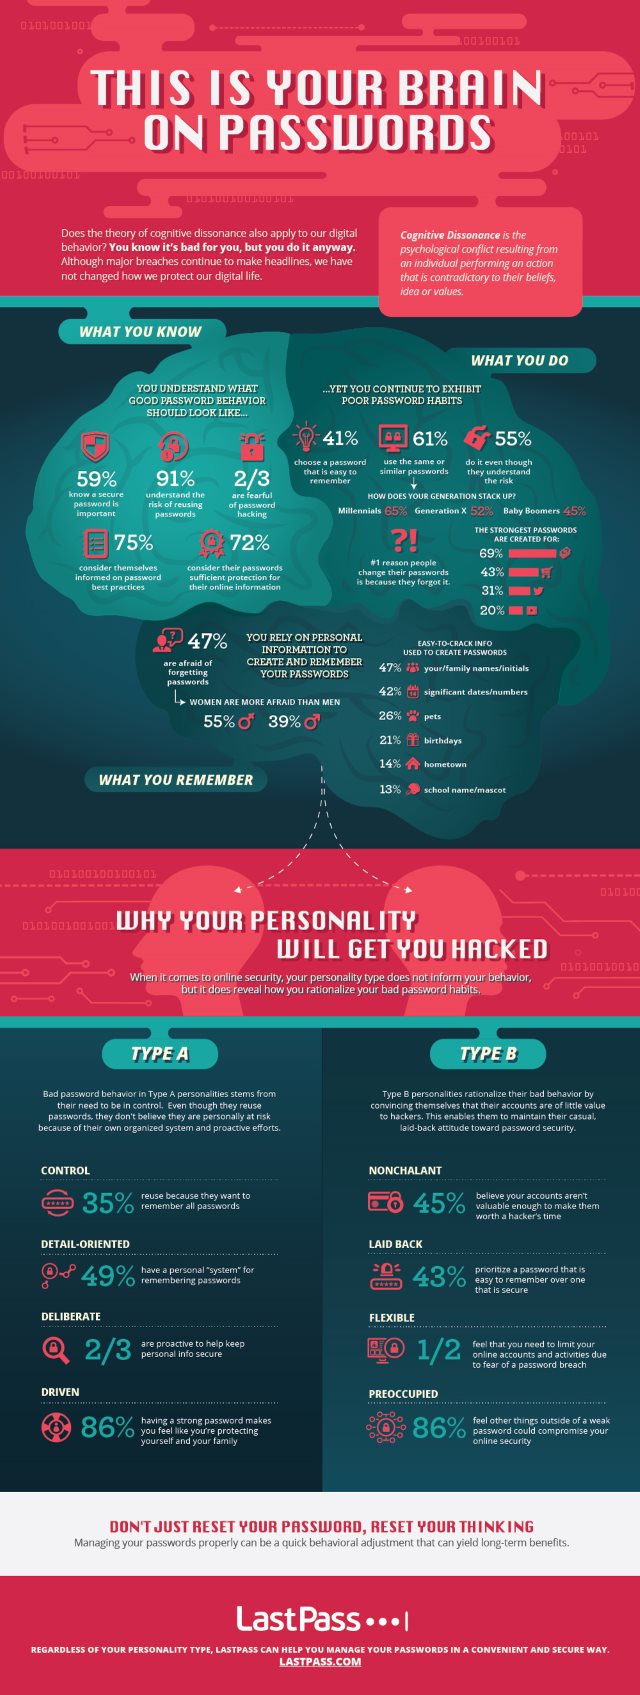 photo of Does your personality make you more likely to get hacked? image